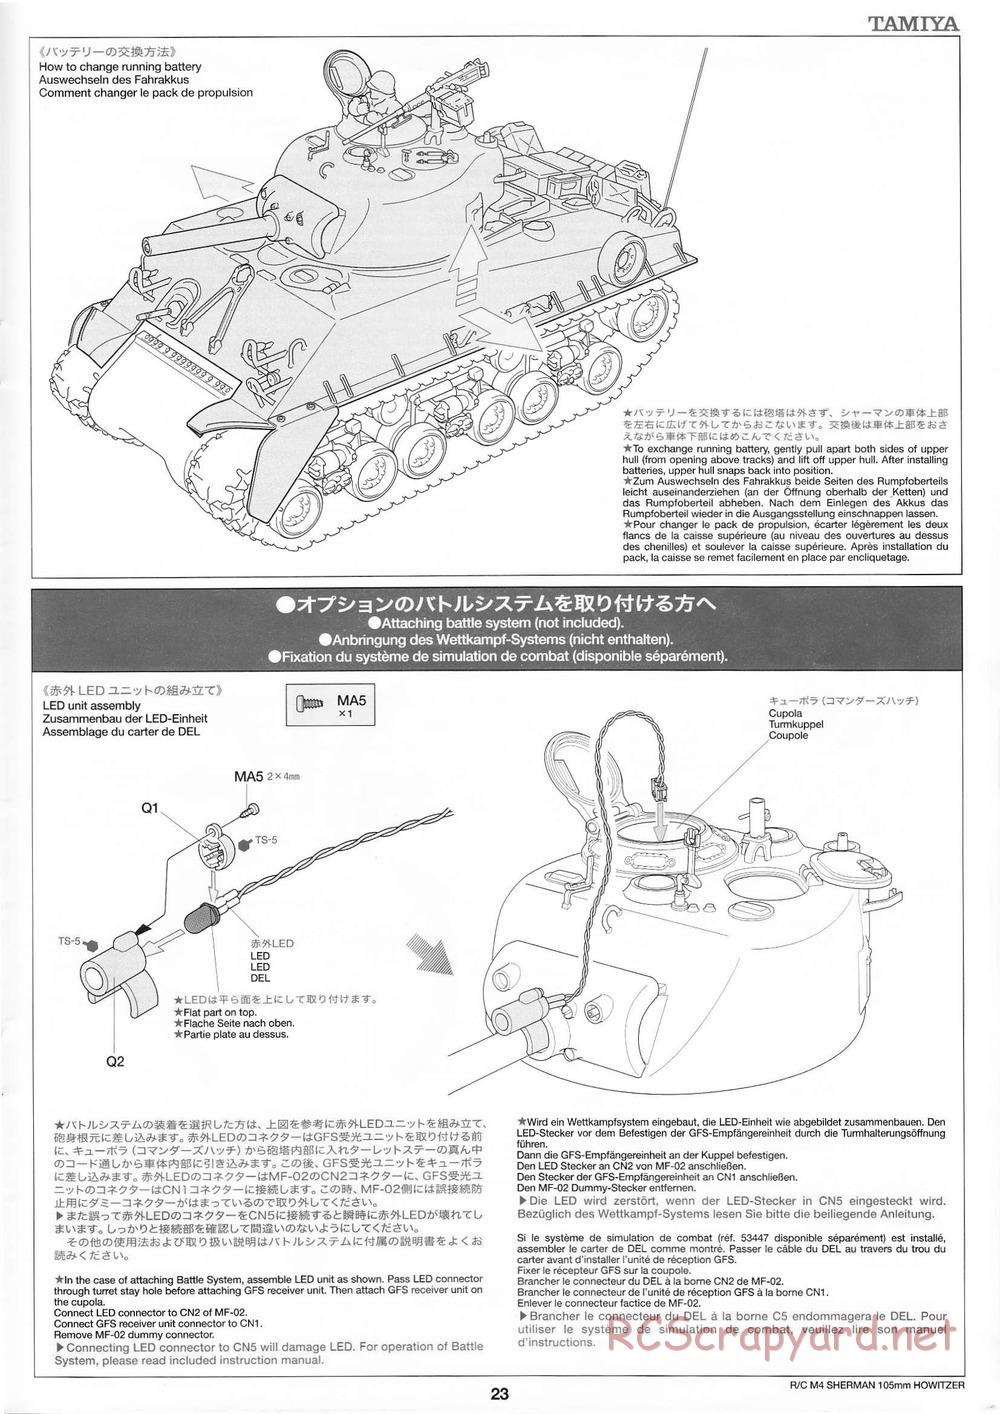 Tamiya - M4 Sherman 105mm Howitzer - 1/16 Scale Chassis - Manual - Page 24